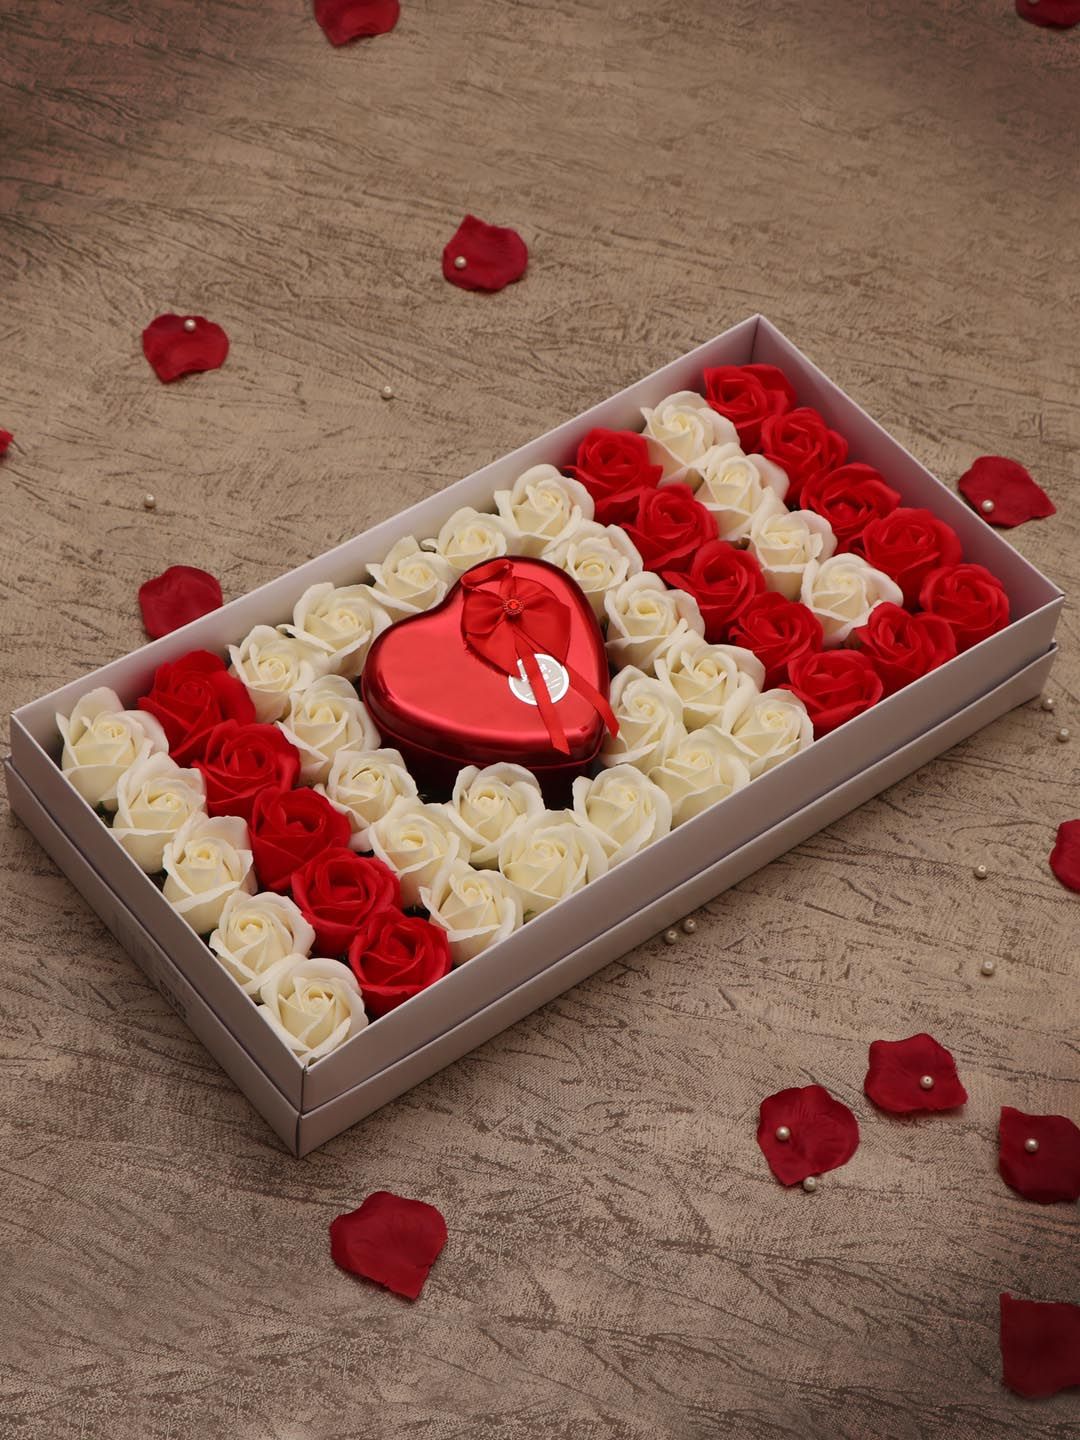 TIED RIBBONS Artificial Scented Rose Flowers with Heart Shape Box and Teddy Price in India